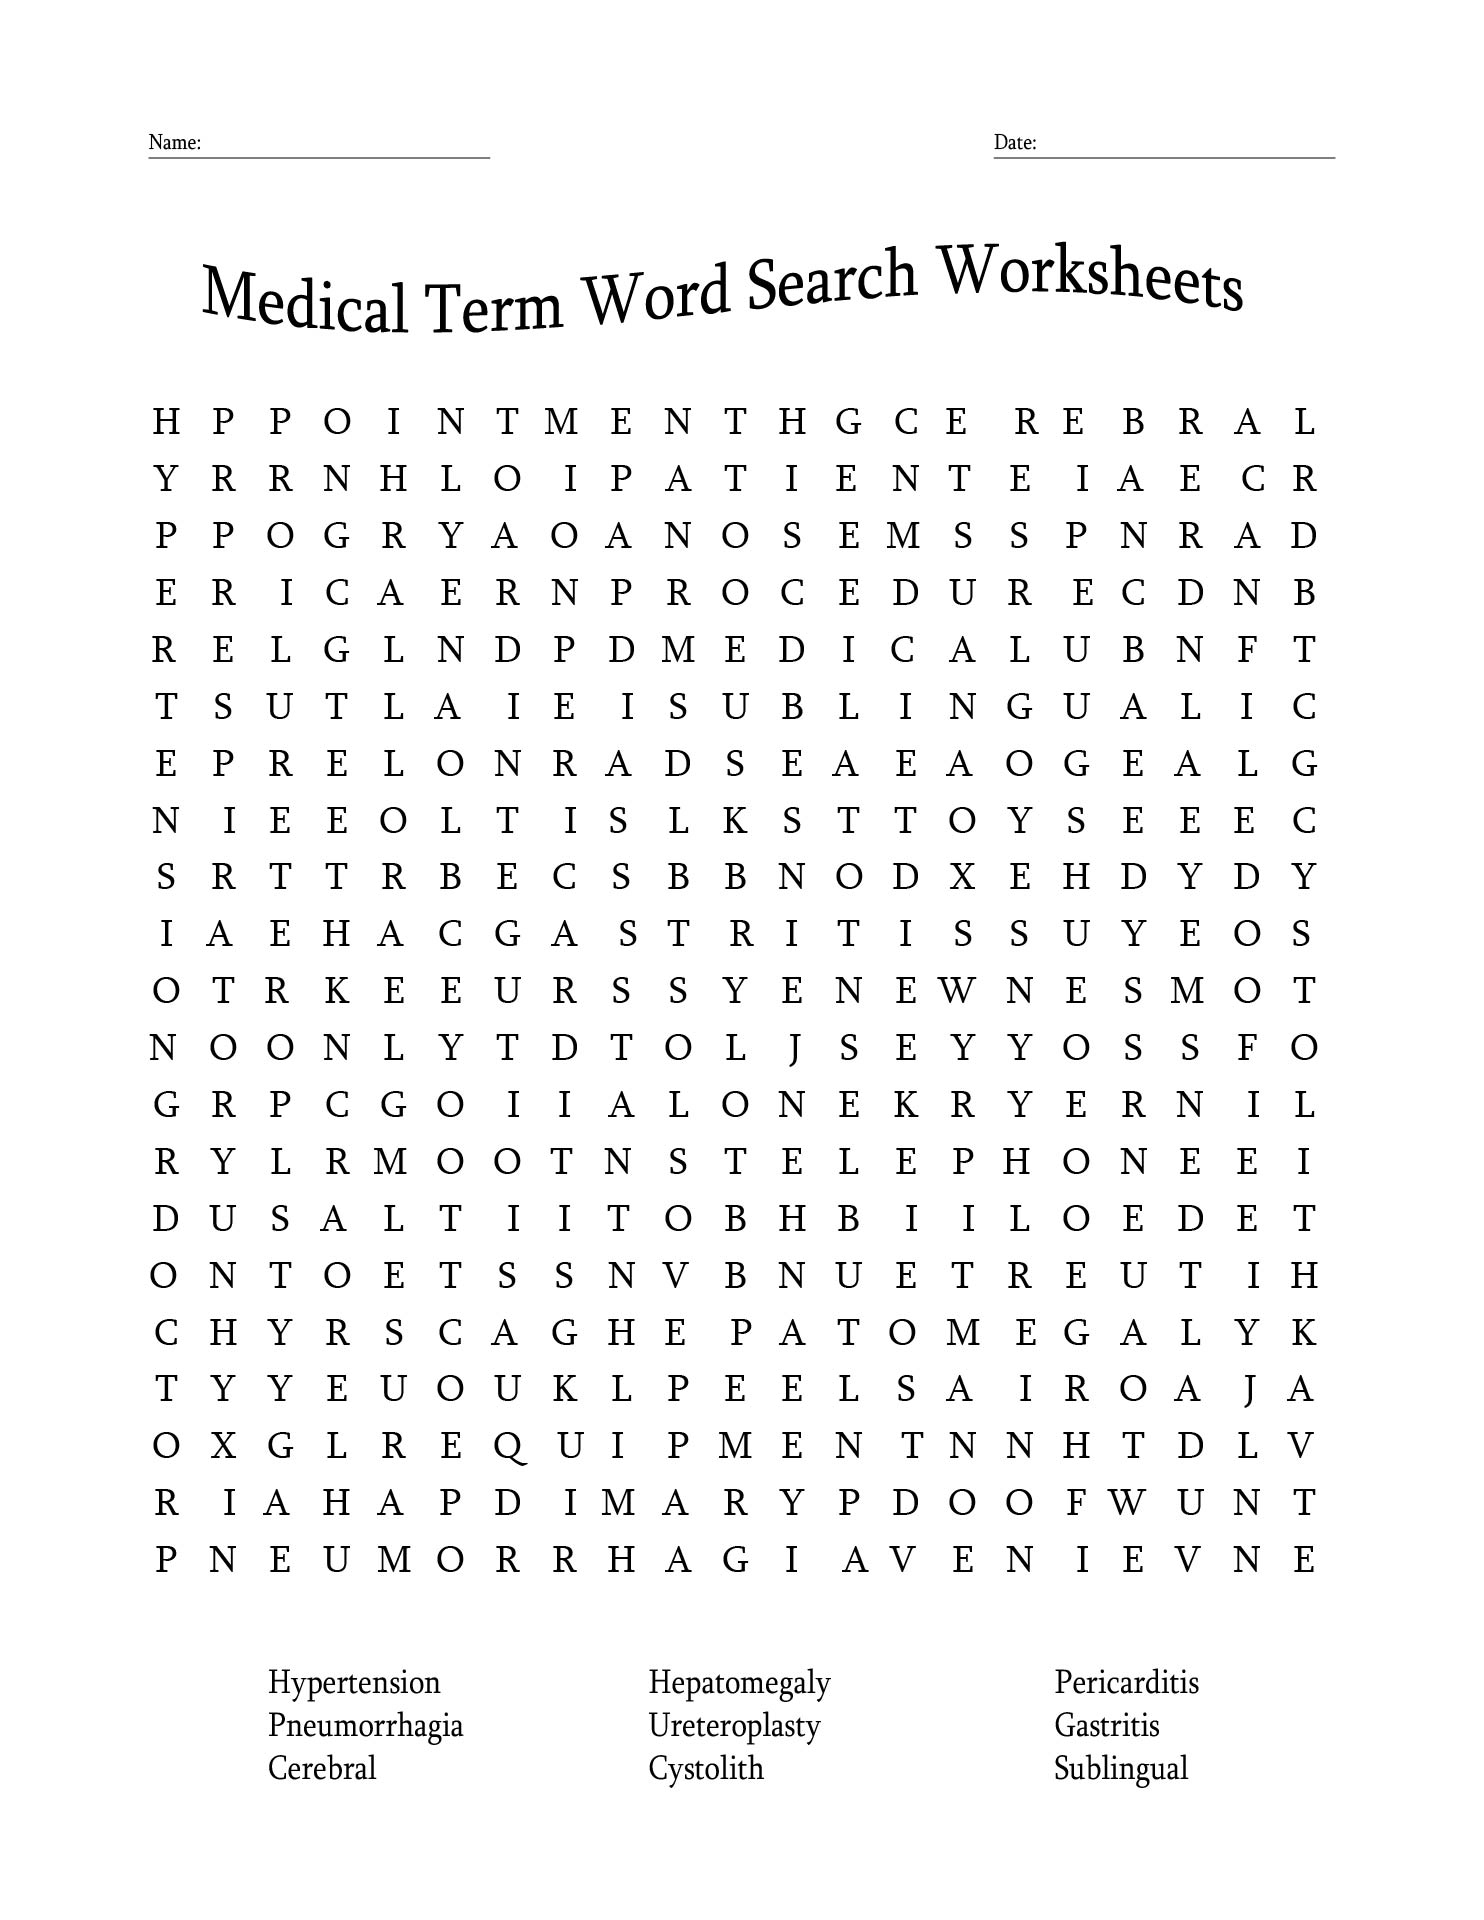 Medical Term Word Search Worksheets Printable